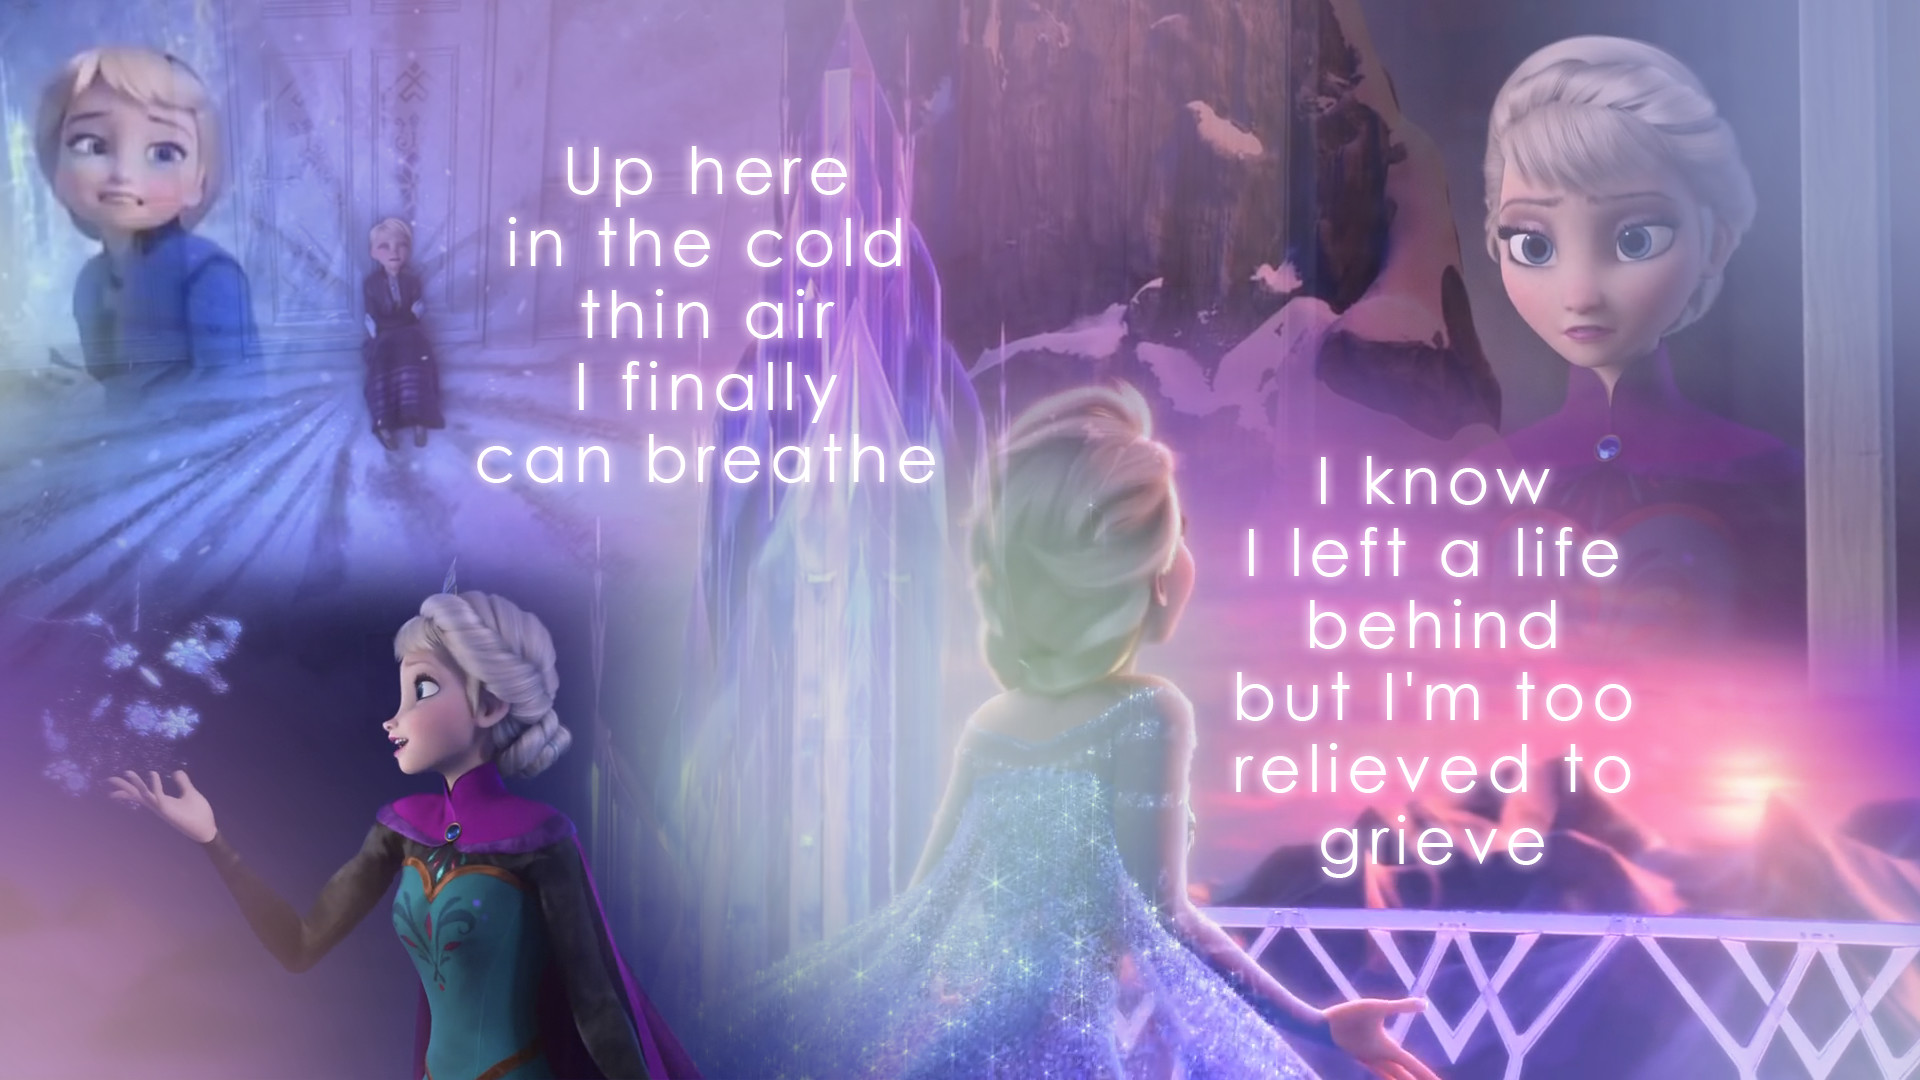 1920x1080 Disney Frozen Elsa Wallpaper by Liz (Click image to enlarge) | Here I Stand  & Here I'll Stay | Disney frozen elsa, Frozen images, Disney frozen